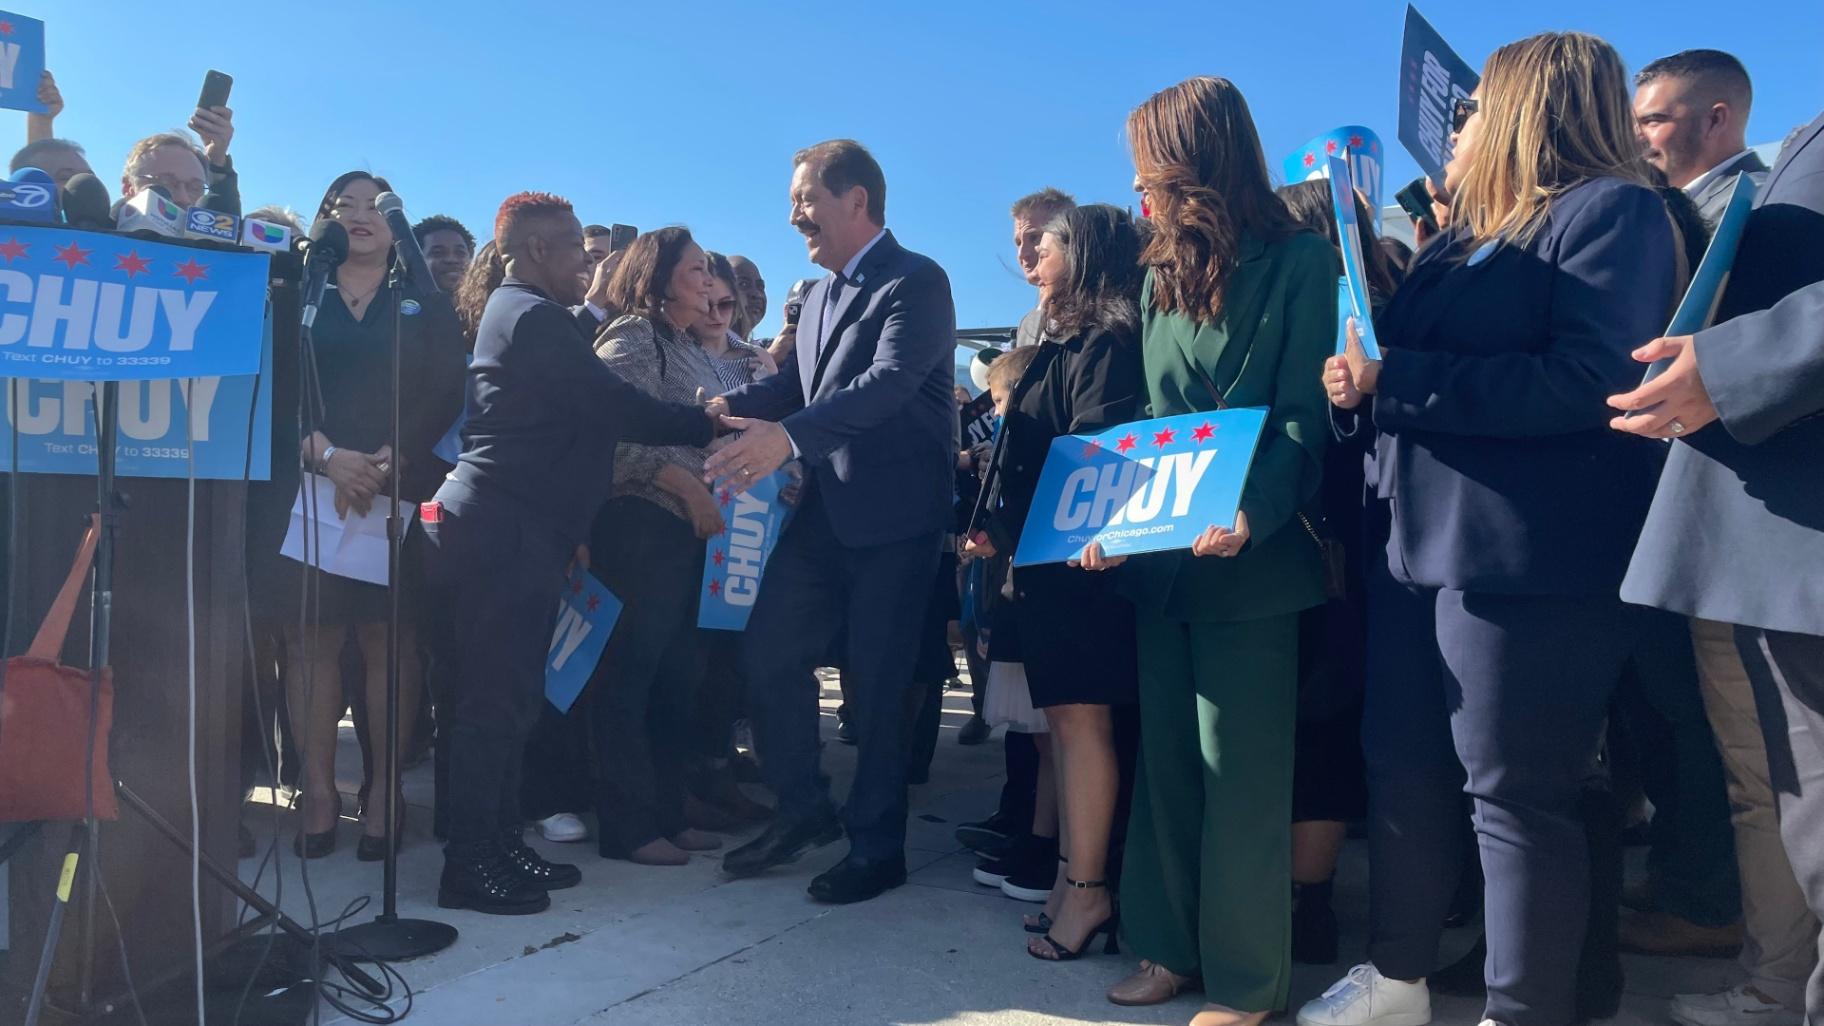 U.S. Rep. Jesus "Chuy" Garcia greets supporters before launching a campaign for mayor of Chicago. (Heather Cherone / WTTW News)